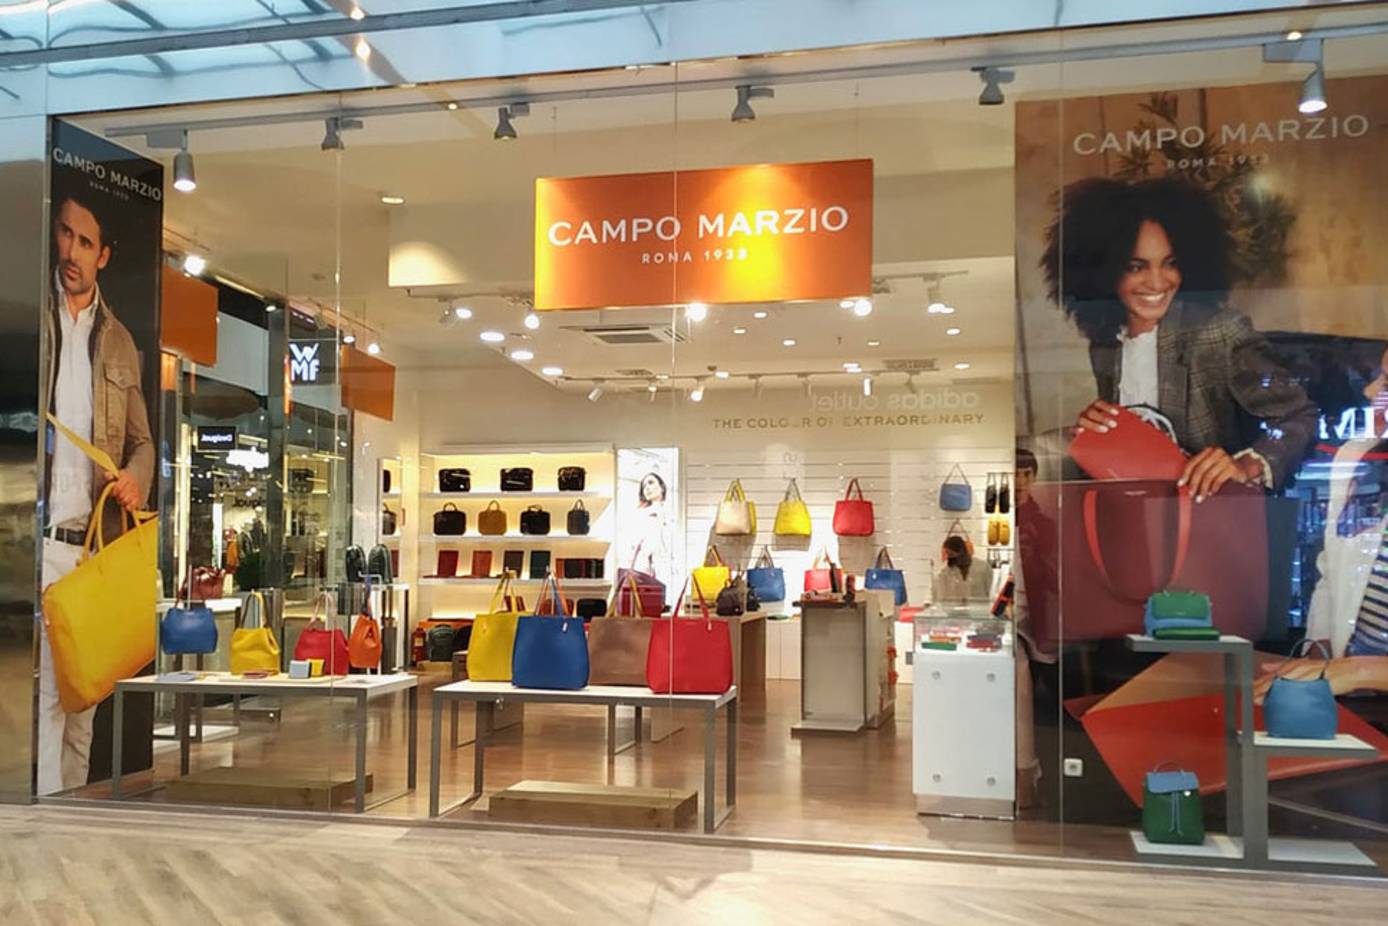 https://fashionunited.com/r/fit=cover,format=auto,gravity=center,height=926,quality=70,width=1388/https://fashionunited.com/img/upload/2021/11/01/campo-marzio-ss-de-los-reyes-the-style-outlets-1-h869qp4e-2021-11-01.jpeg